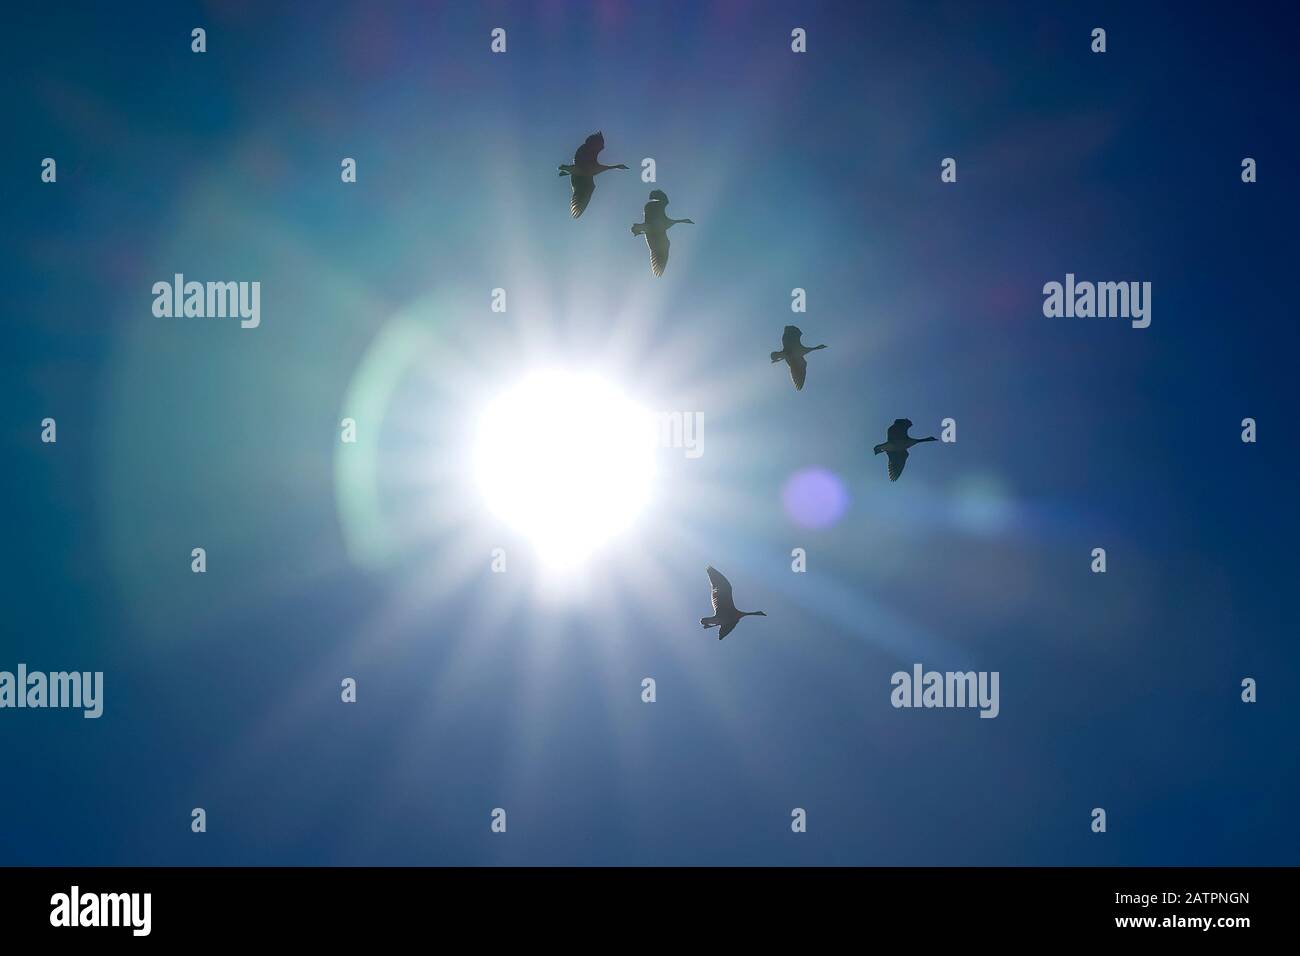 A flock of Canadian geese flying in formation through the sun with a blue sky. Scottsdale, Arizona. Stock Photo